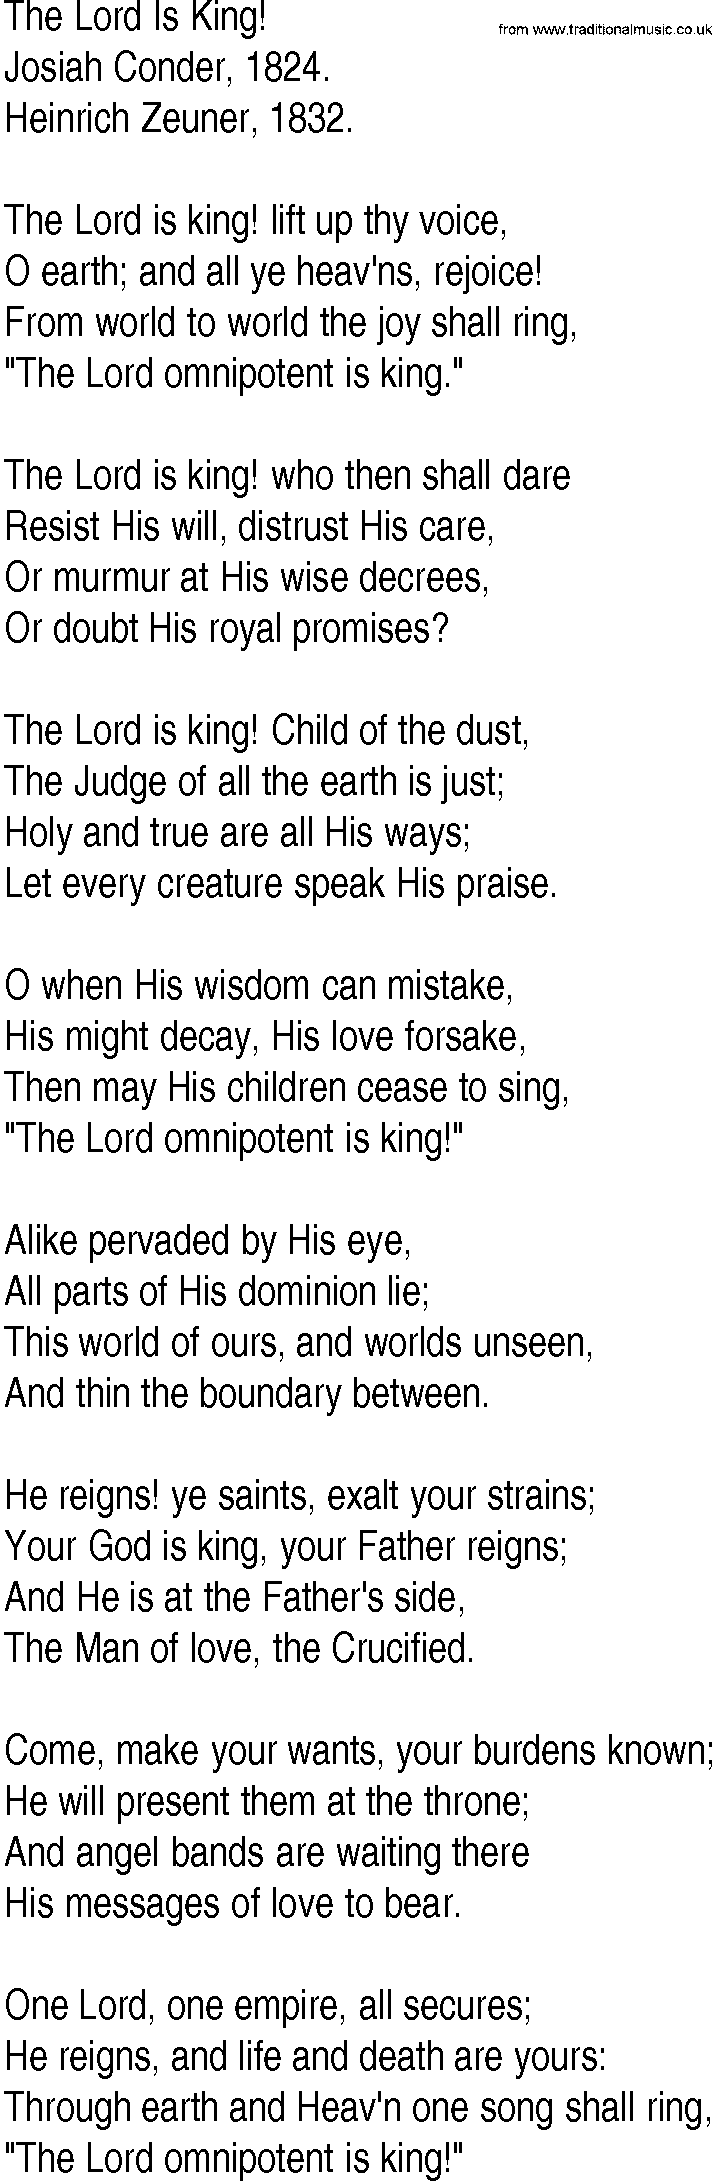 Hymn and Gospel Song: The Lord Is King! by Josiah Conder lyrics